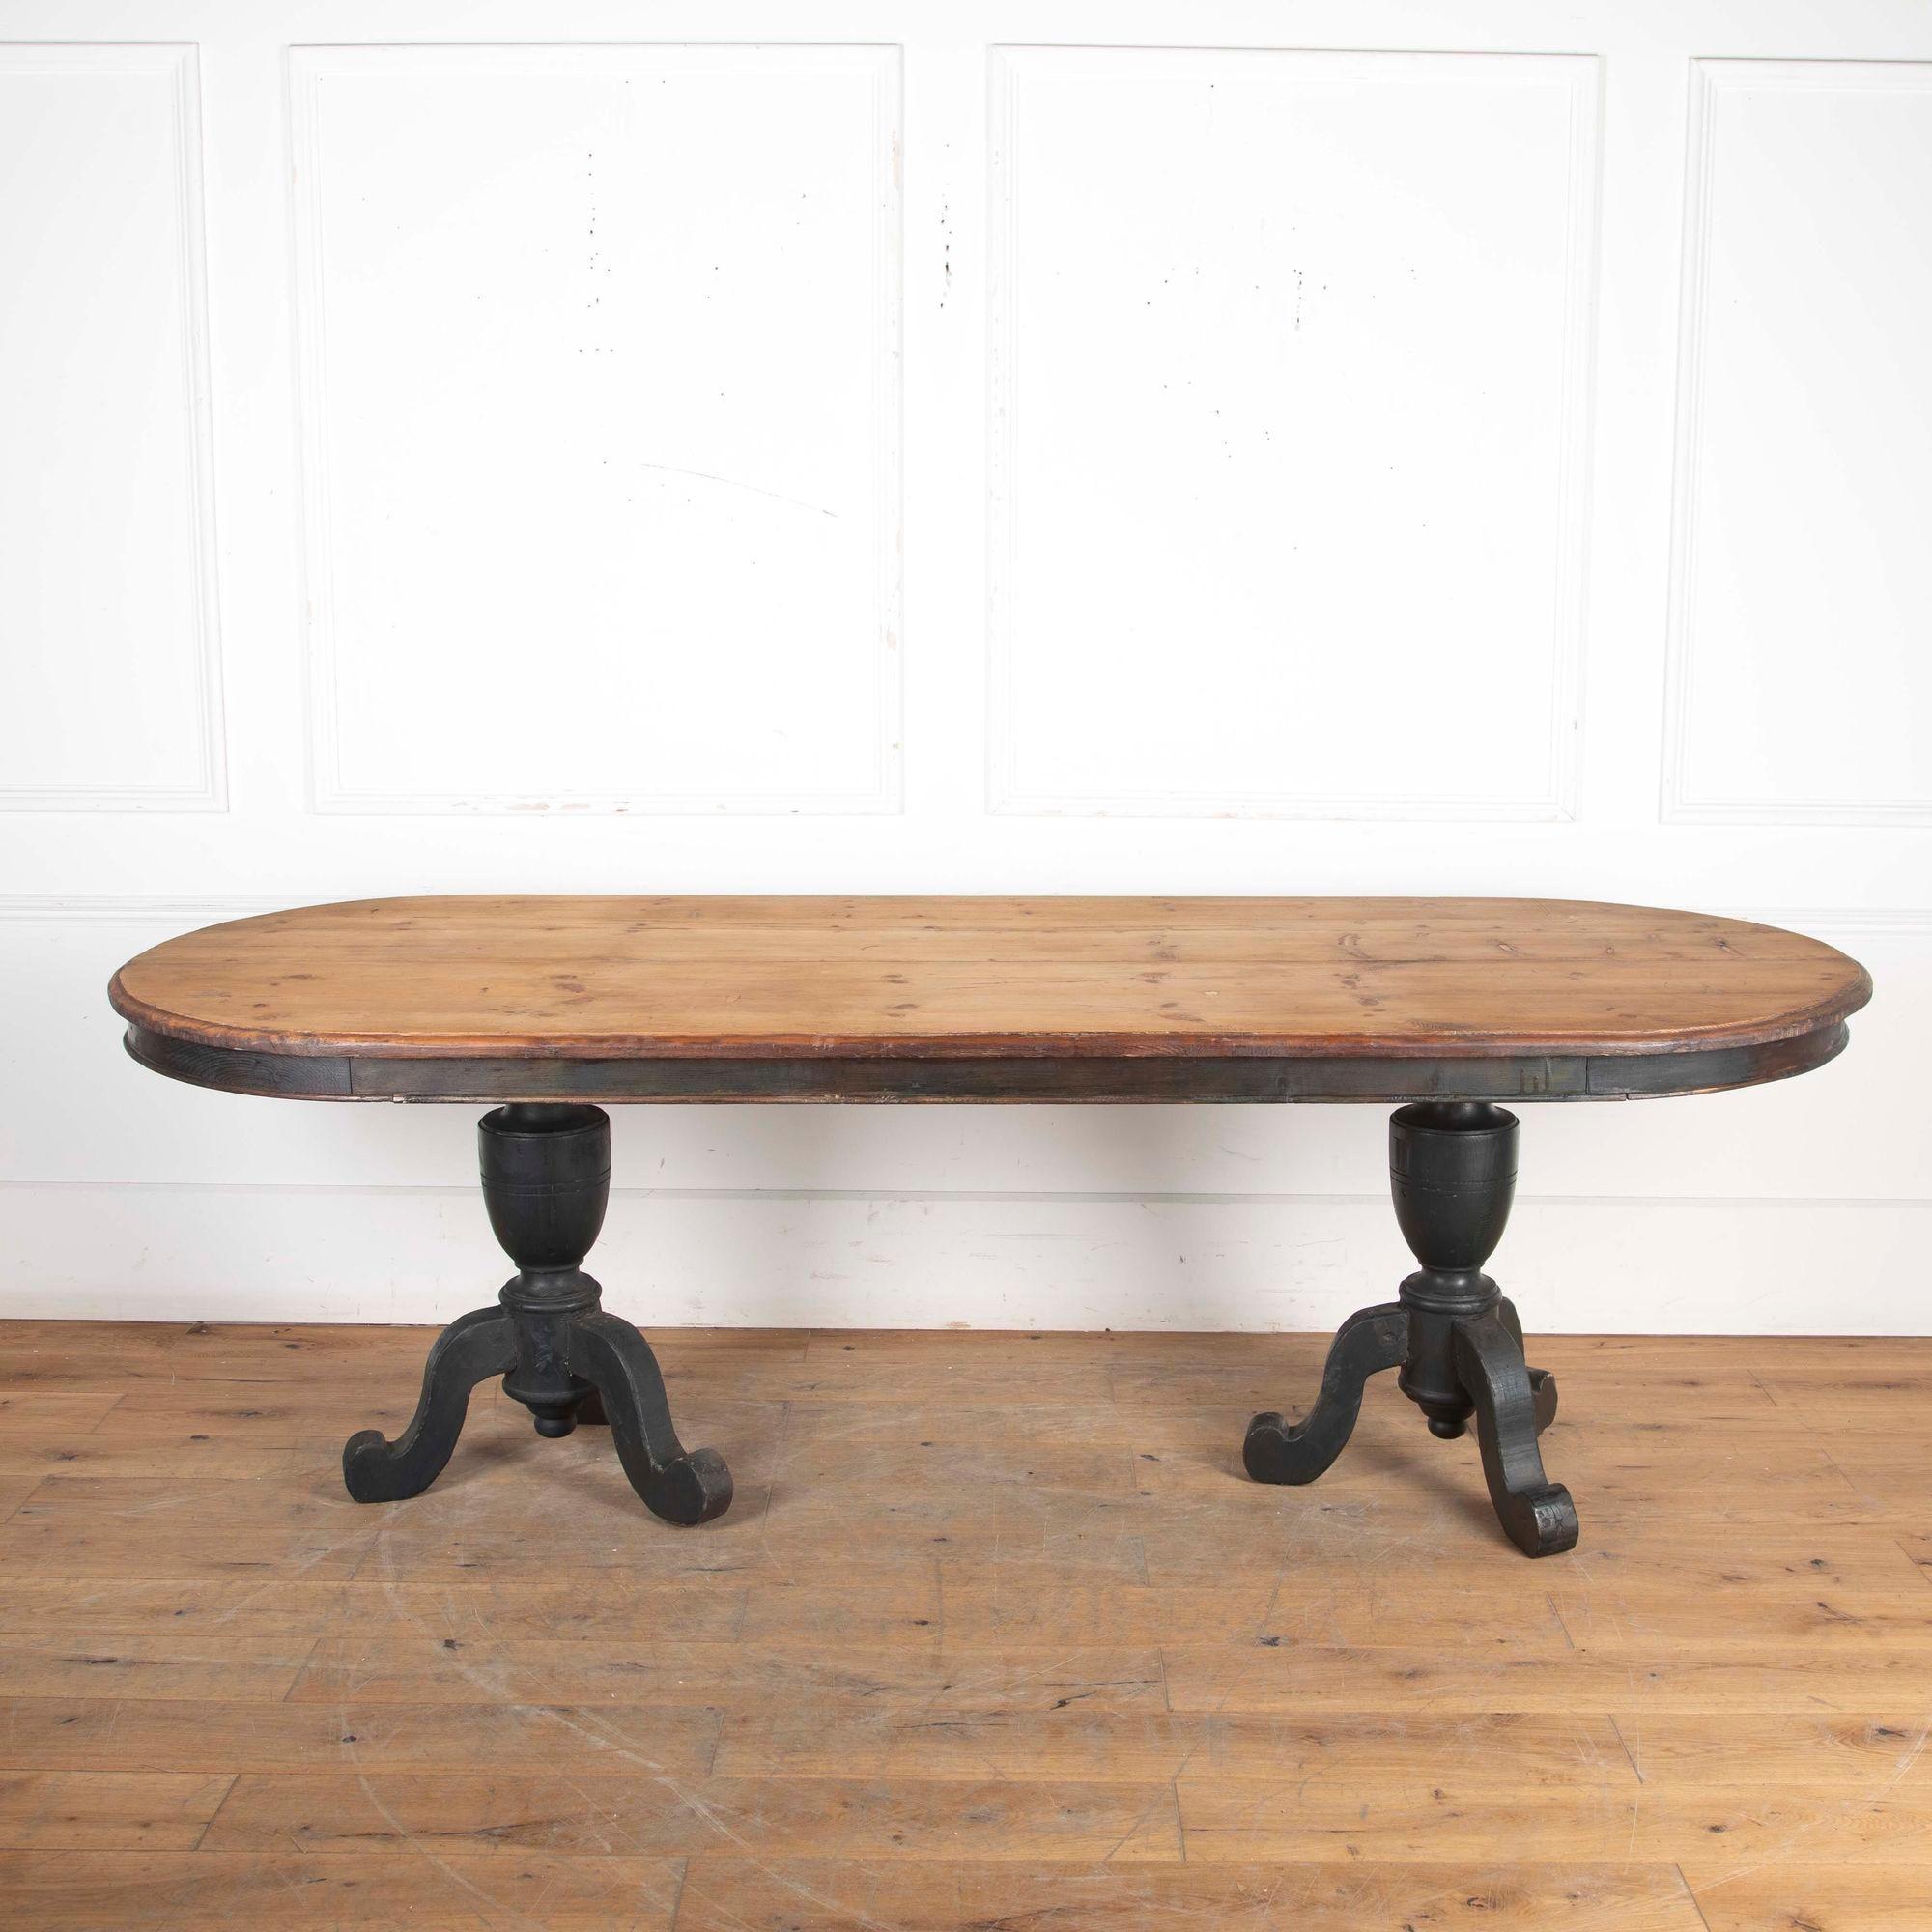 French Provincial 19th Century French Pine Oval Dining Table